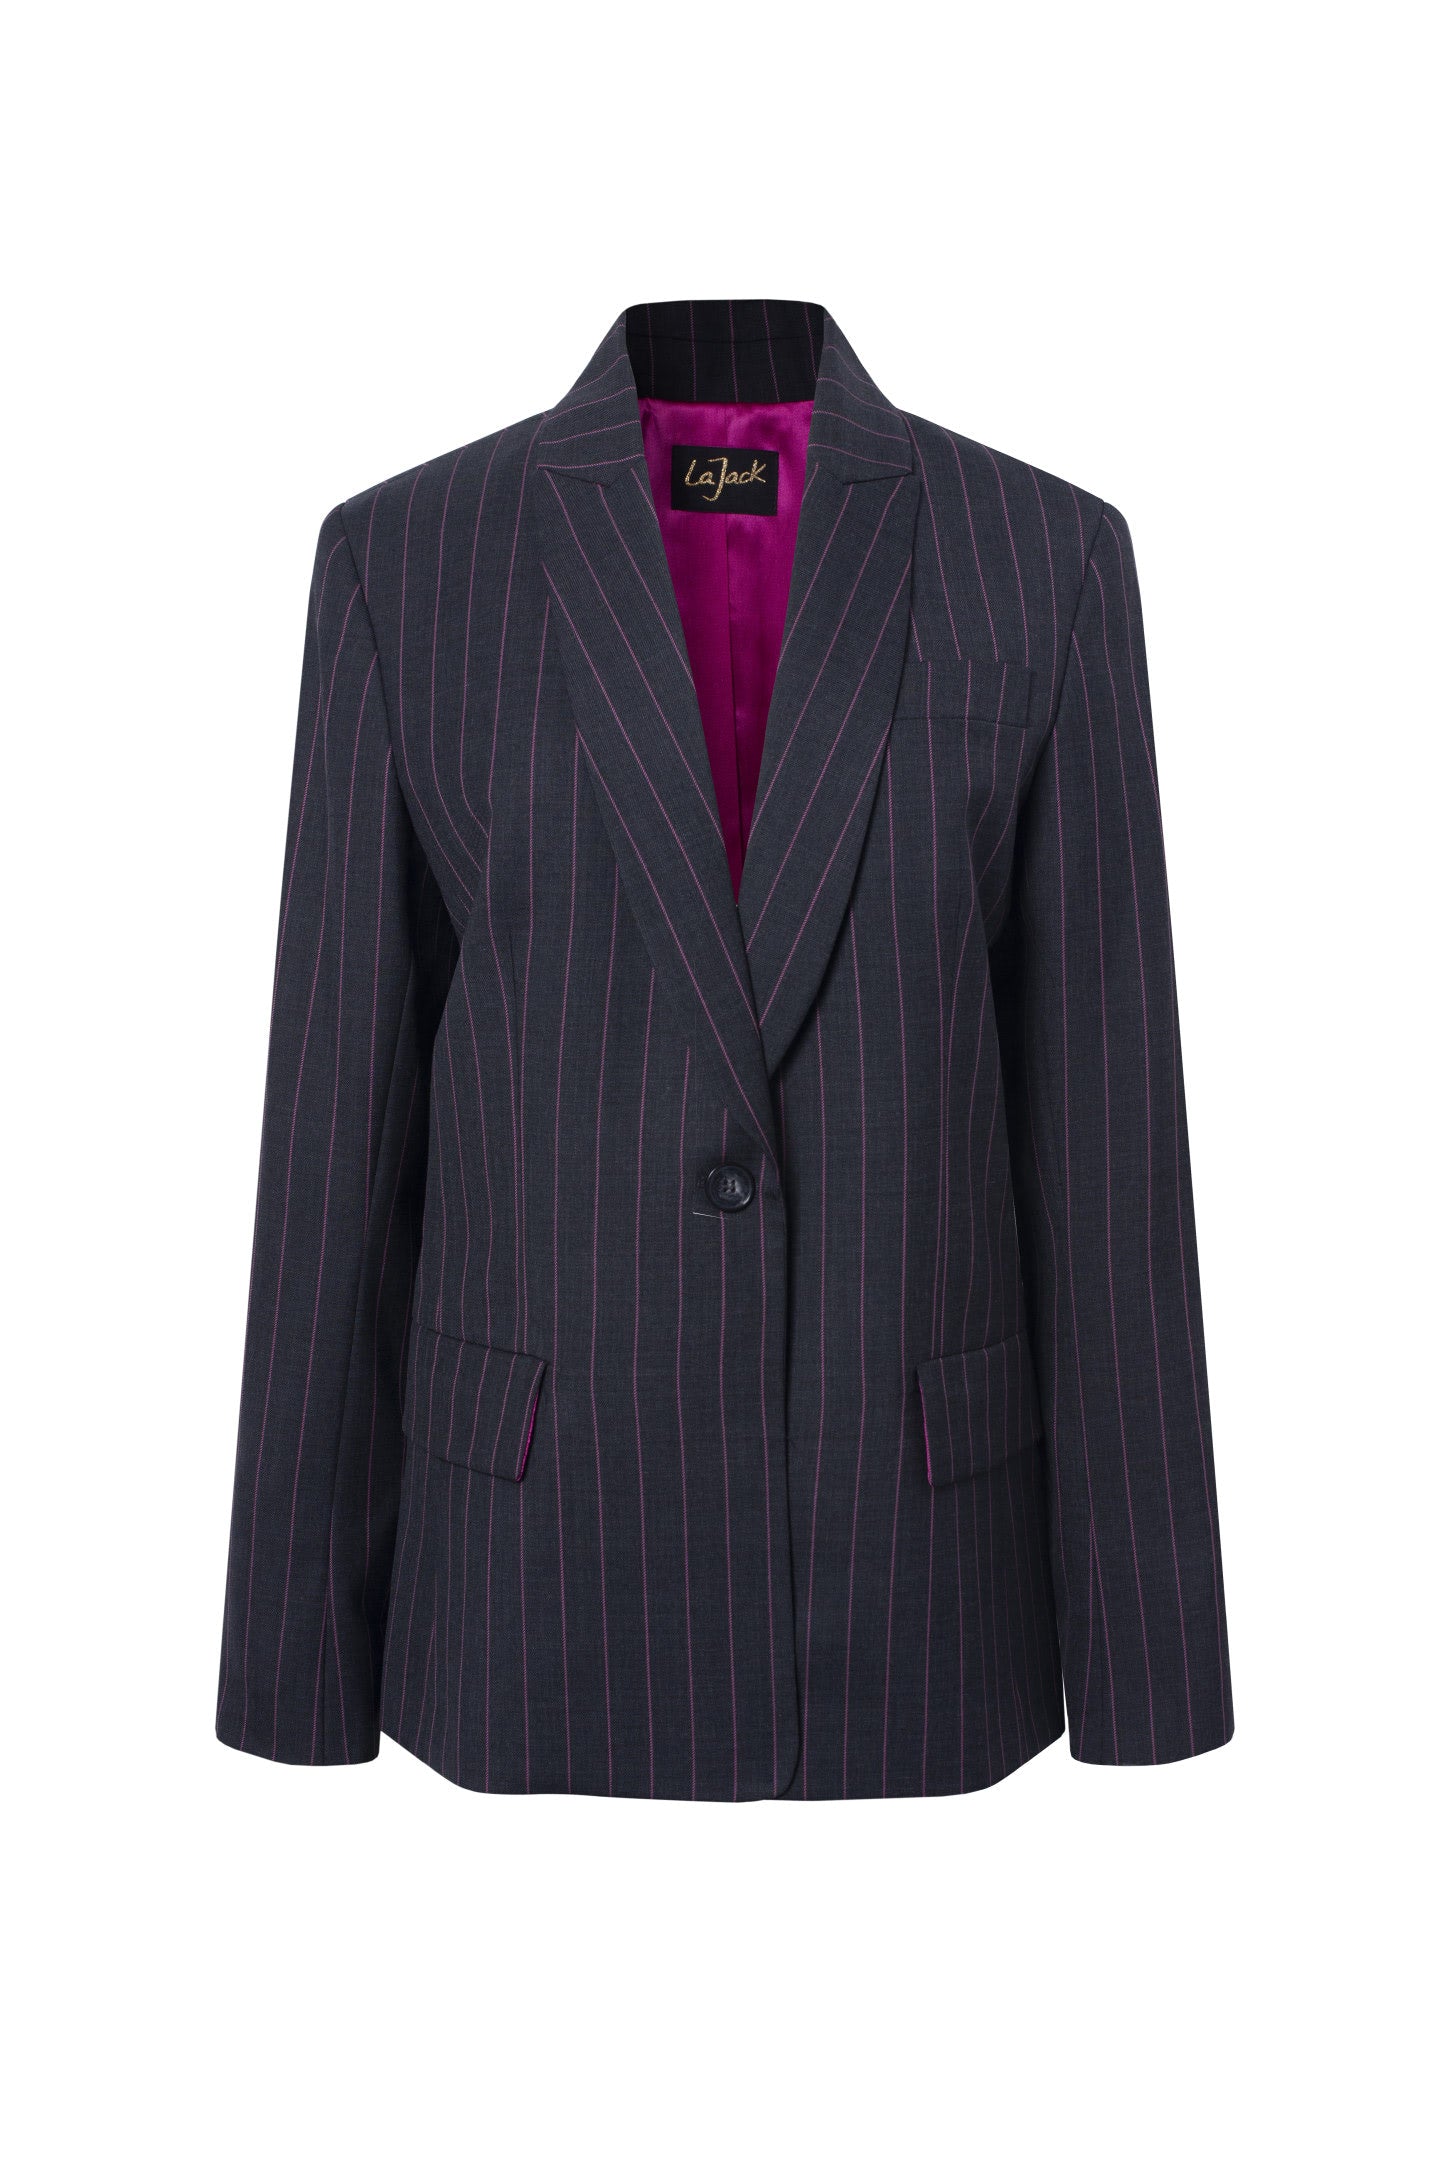 La Jenny - Fitted jacket with raspberry tennis stripes and fuchsia lining